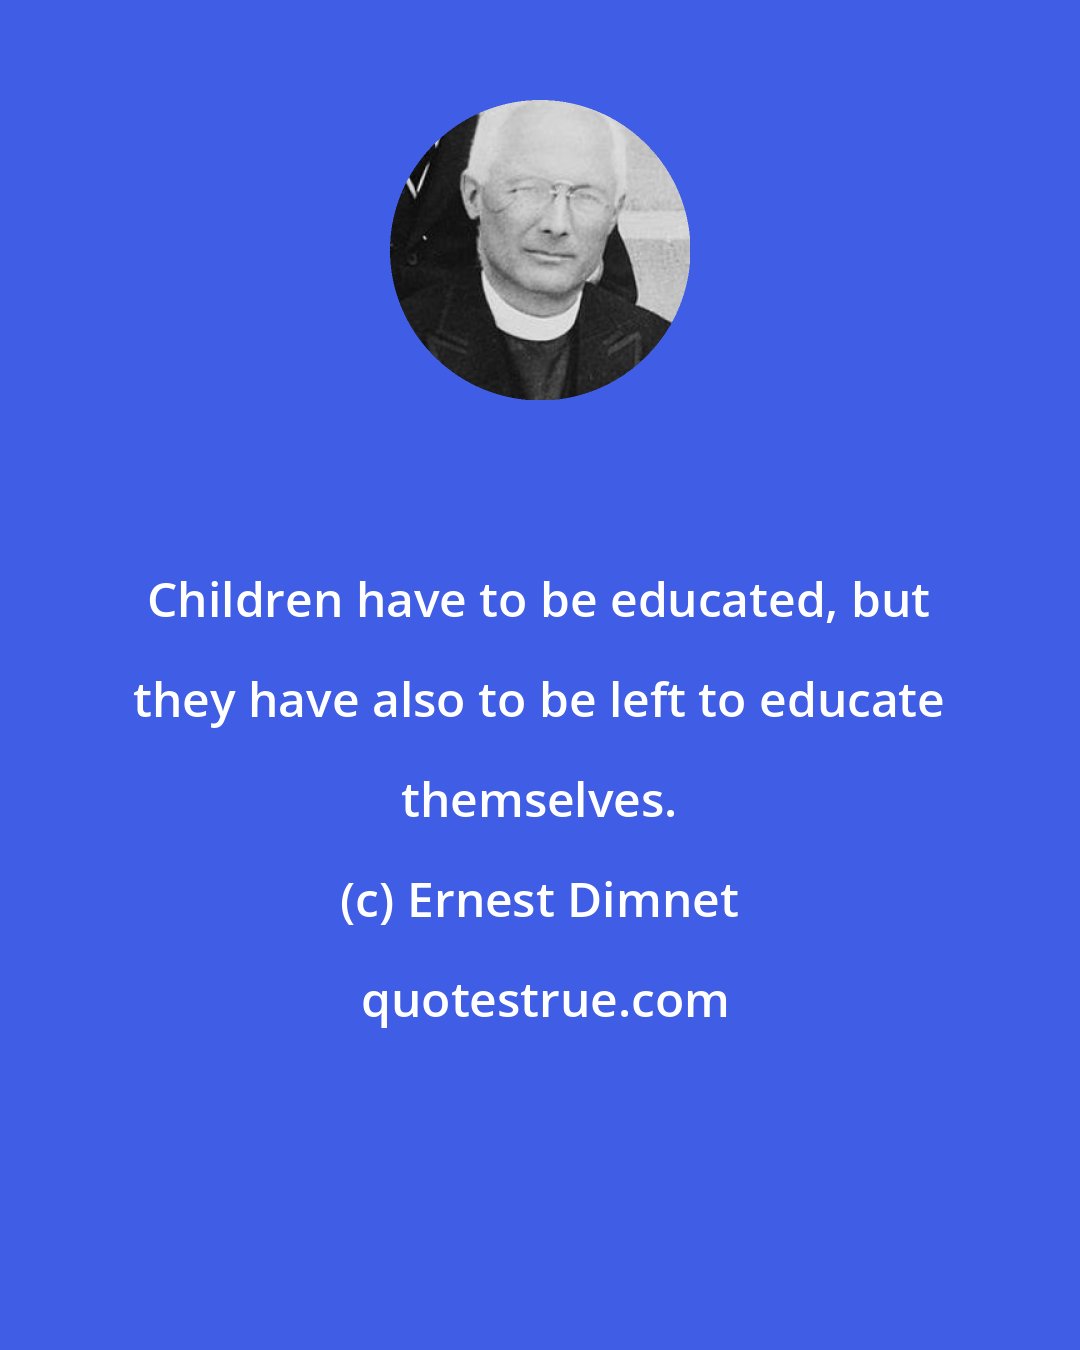 Ernest Dimnet: Children have to be educated, but they have also to be left to educate themselves.